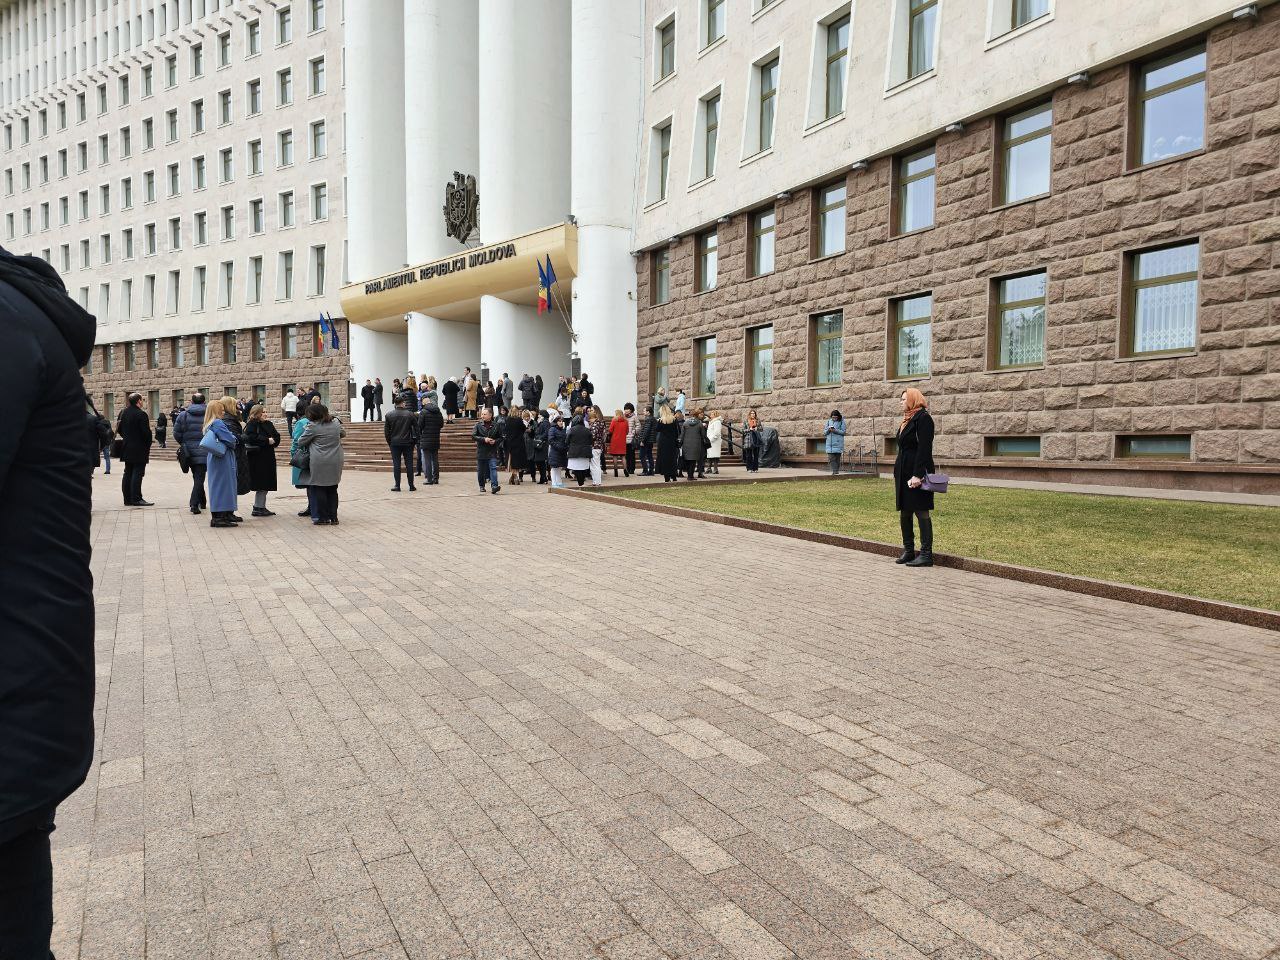 Fire alarm at the Parliament. The employees of the institution were evacuated